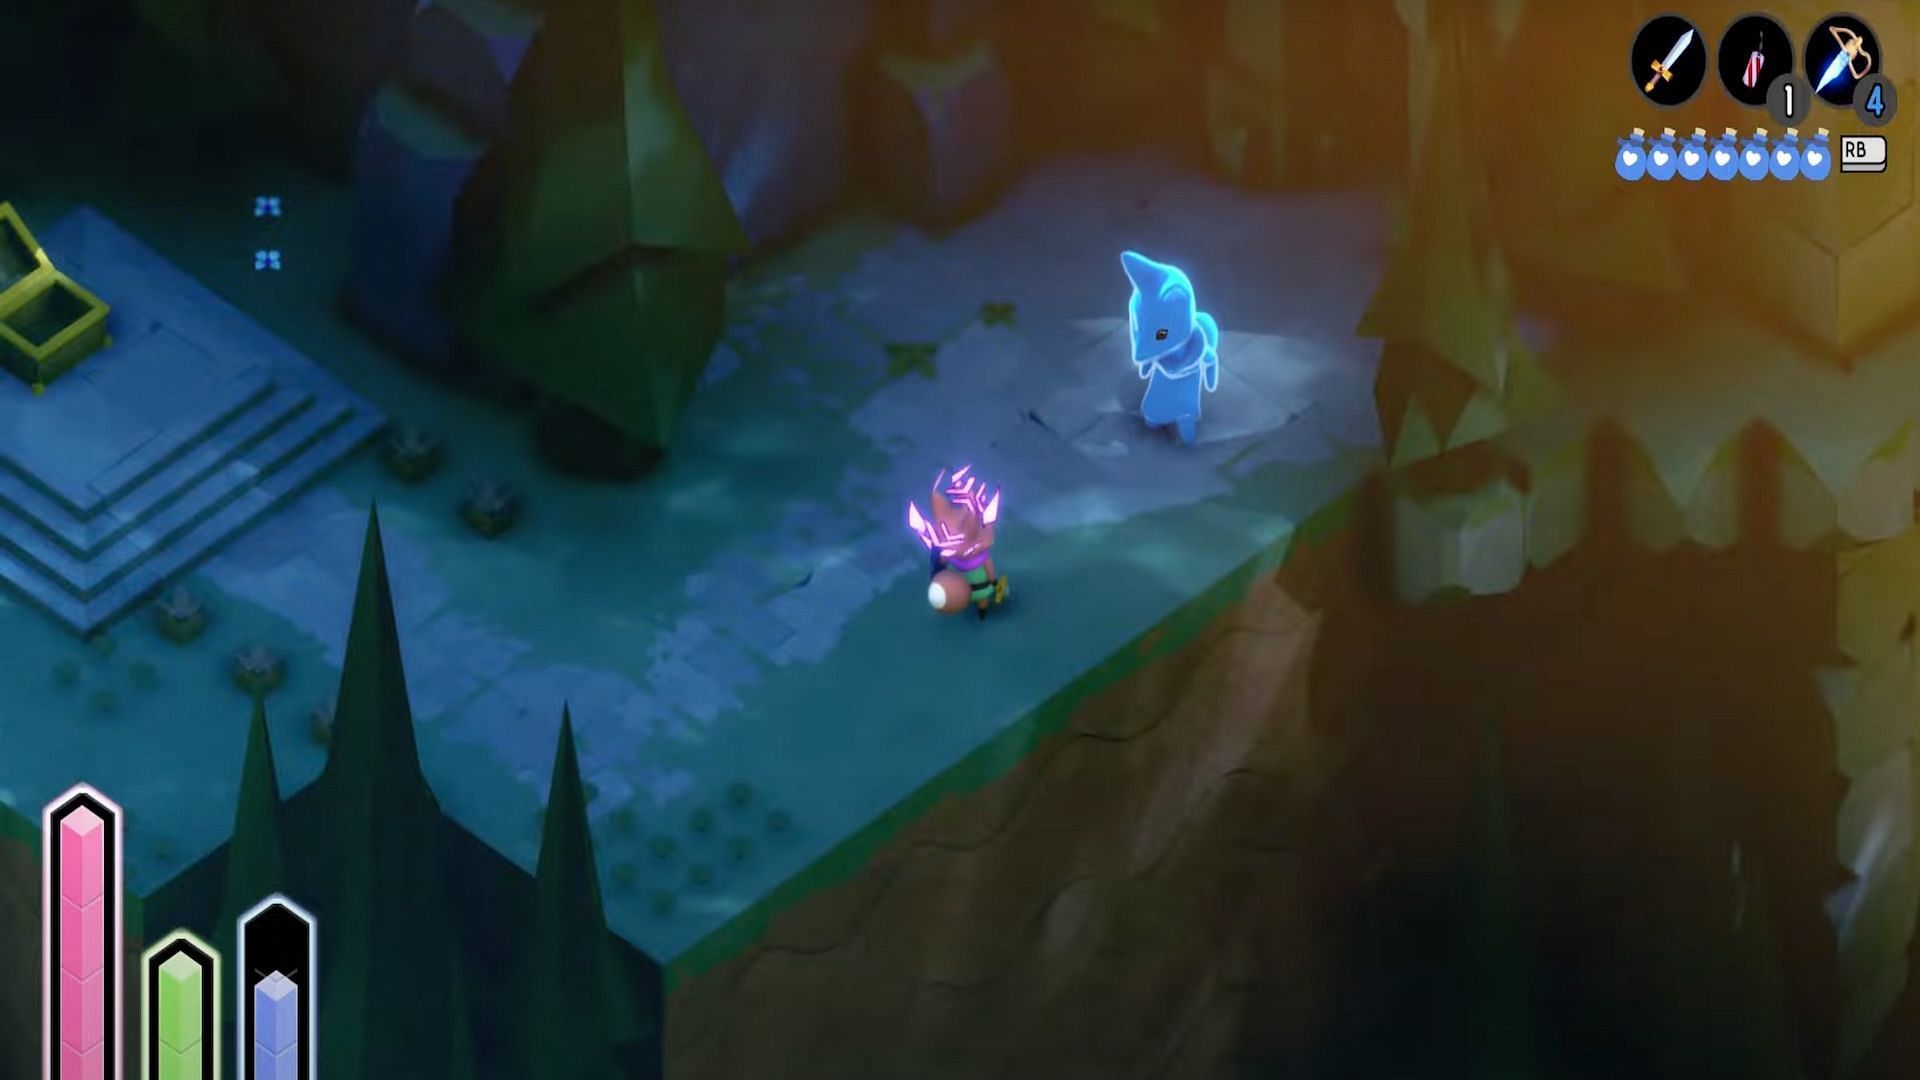 Players will have to do a bit of traveling and dancing in order to claim the fairies in the East Forest (Image via BattleBunny/YouTube)